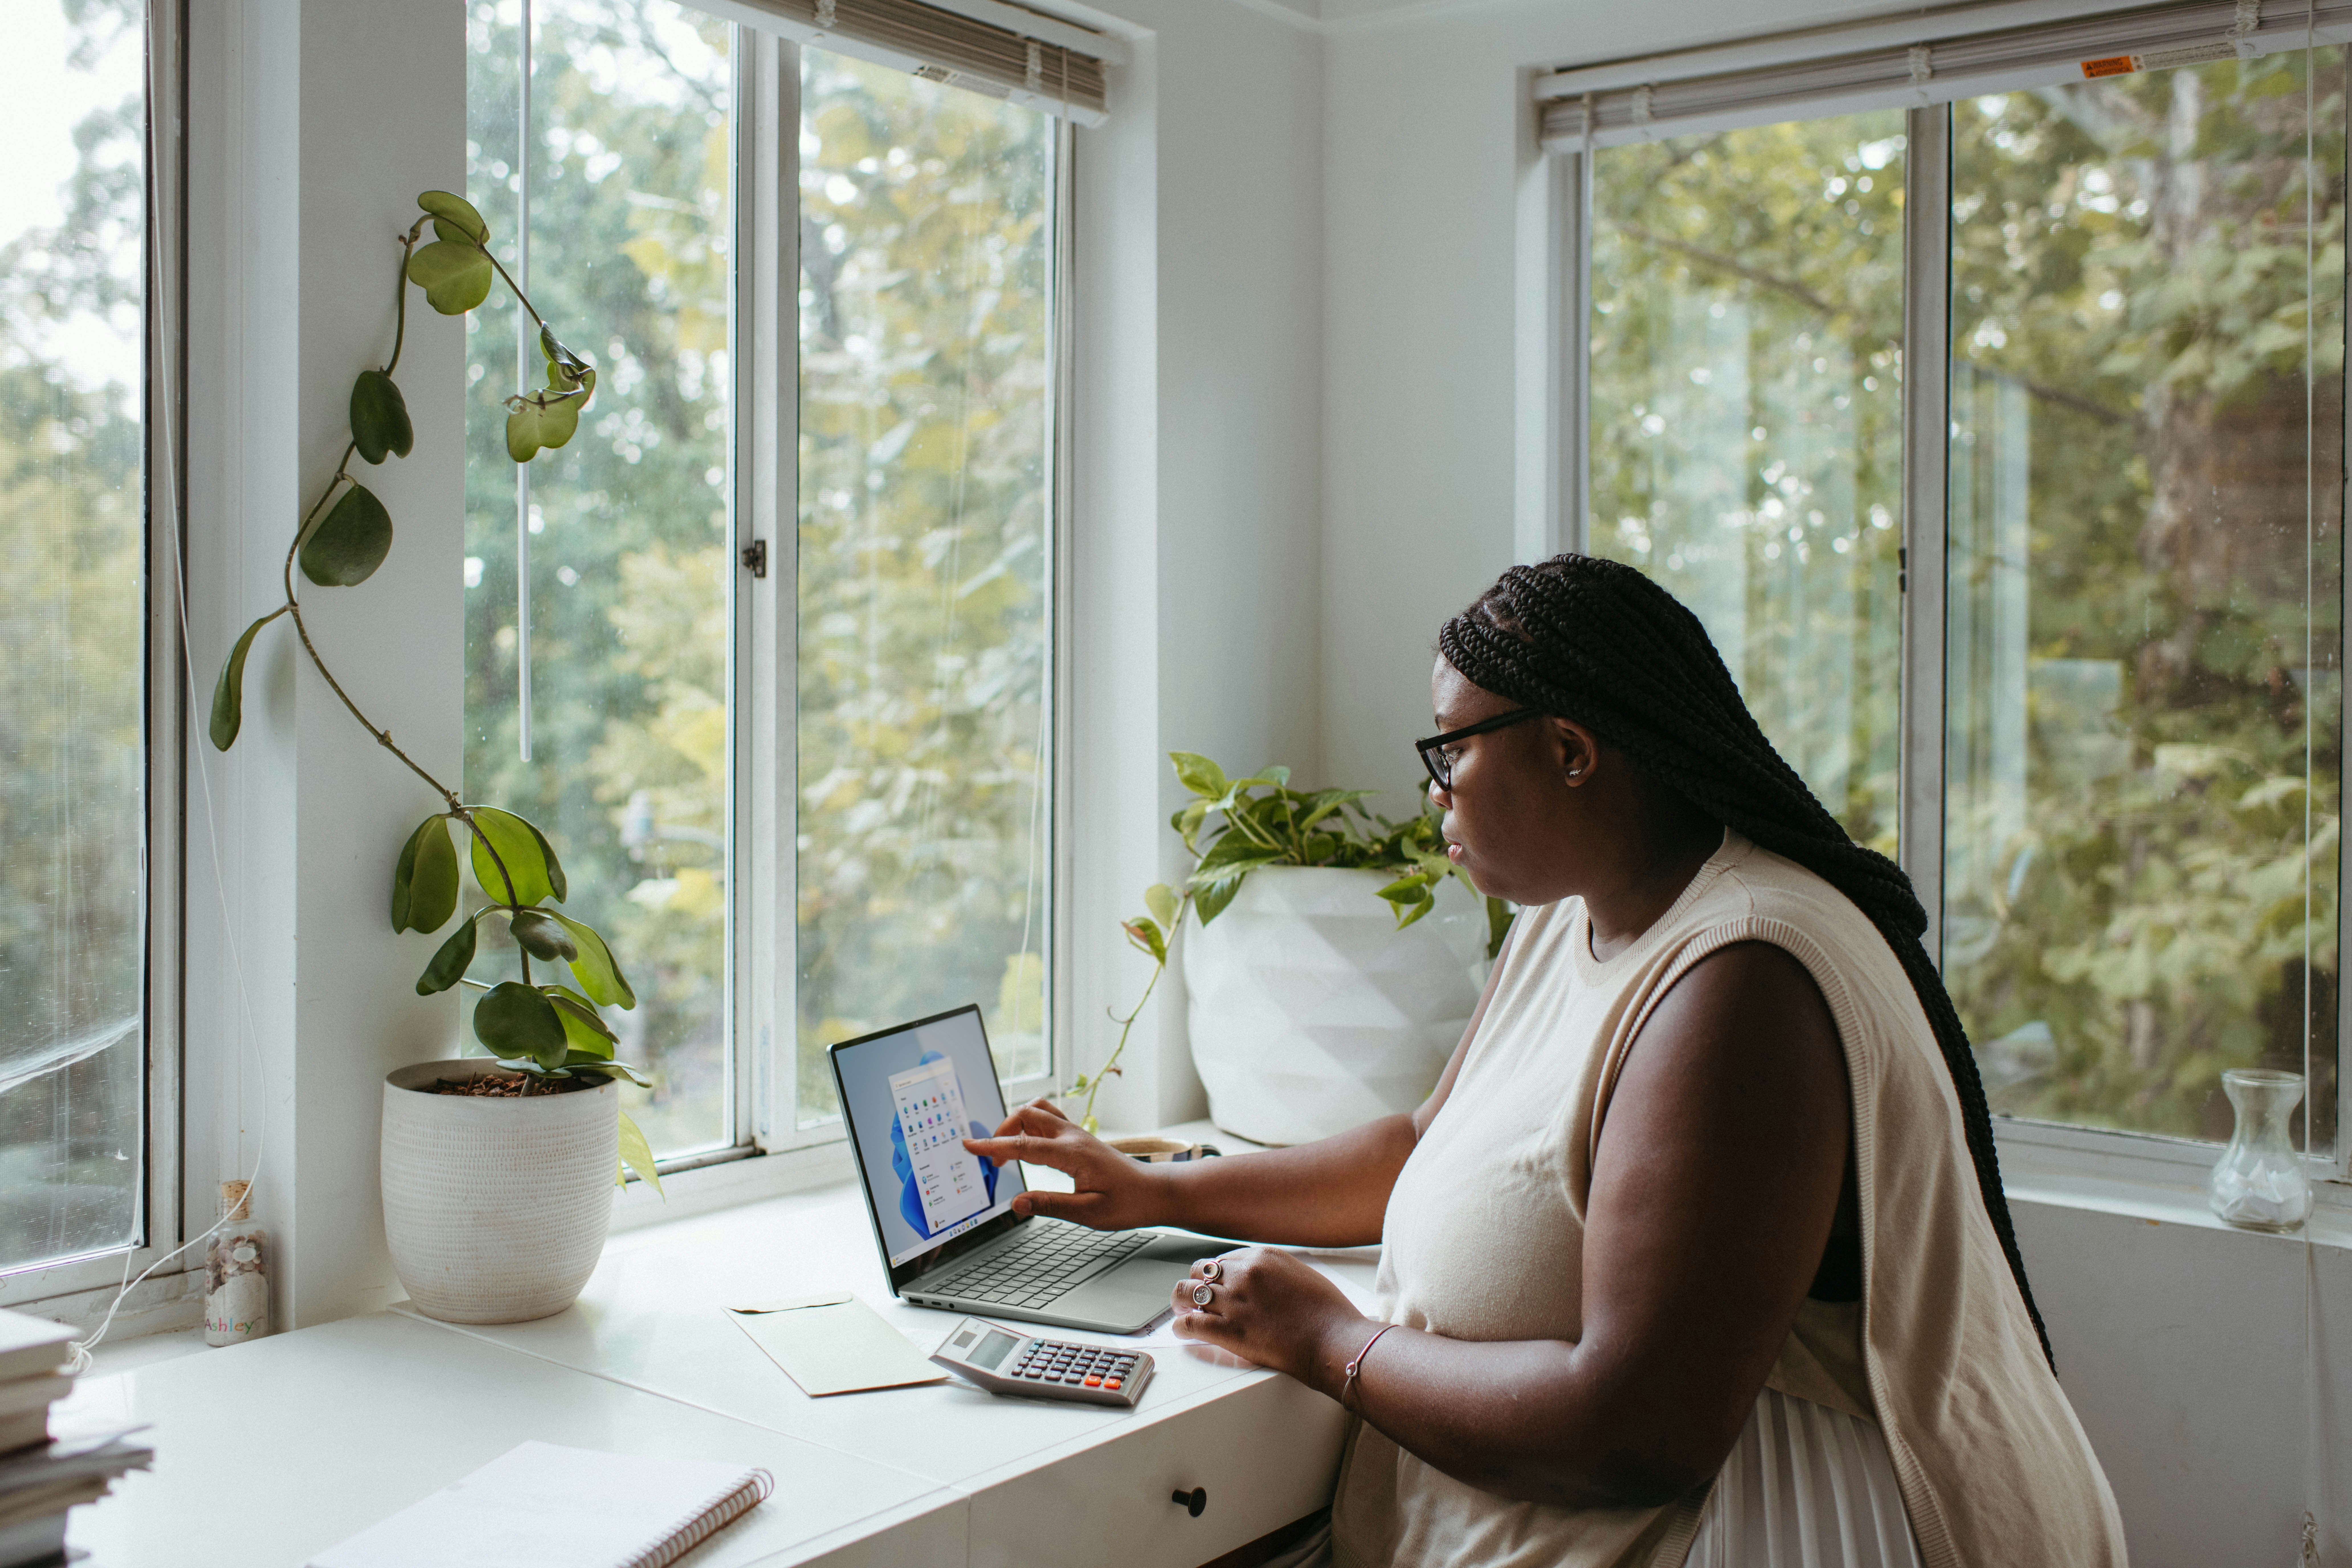 How Remote Work Empowers Women And Fights “Greedy Work”